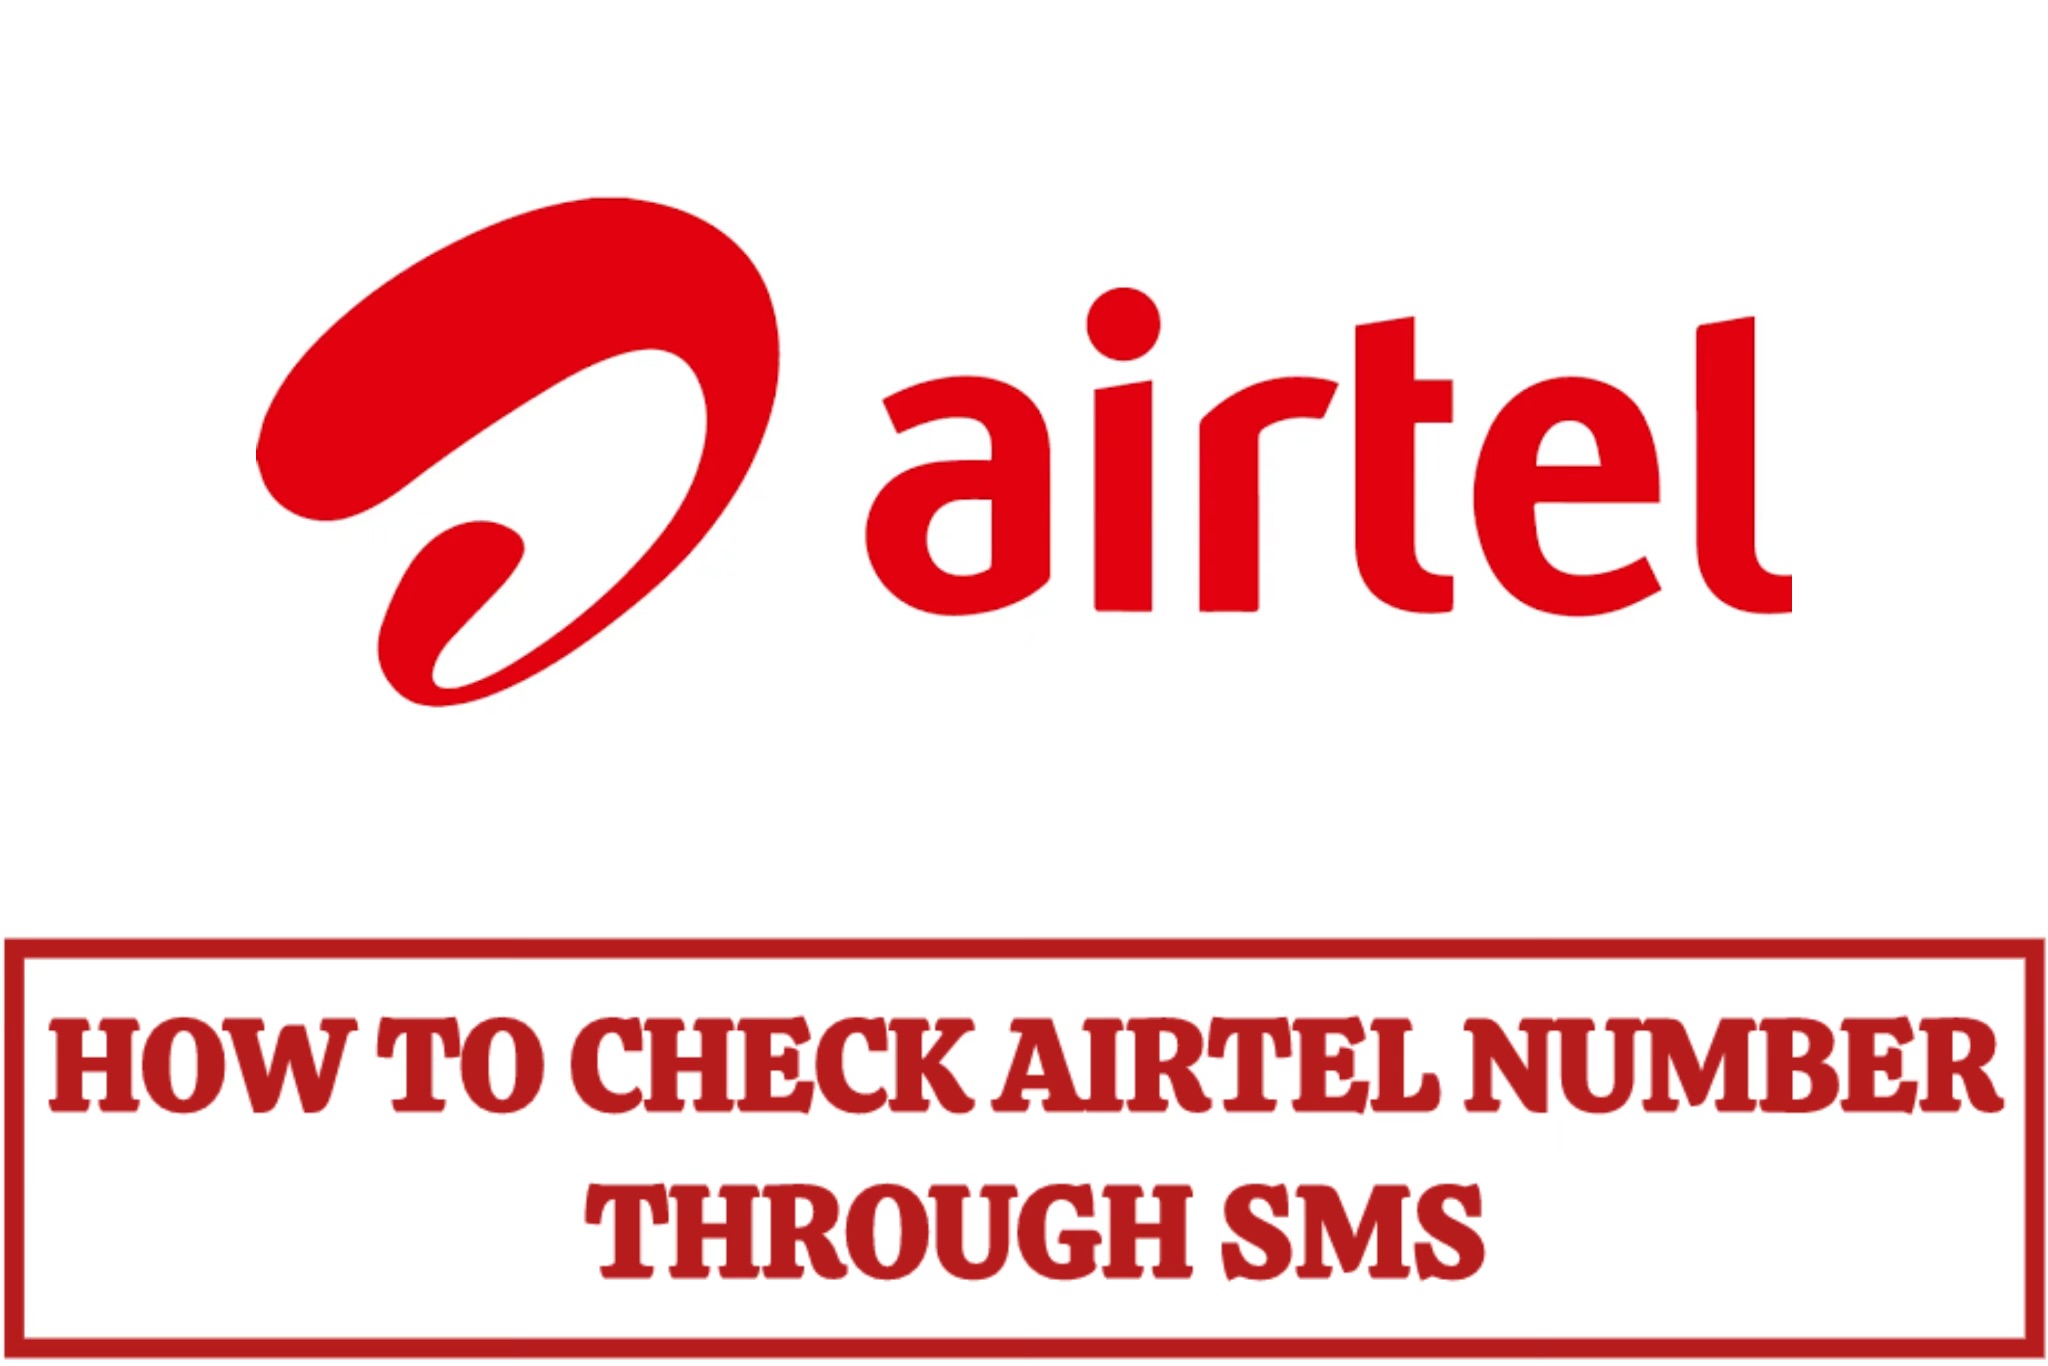 How to check Airtel number through sms